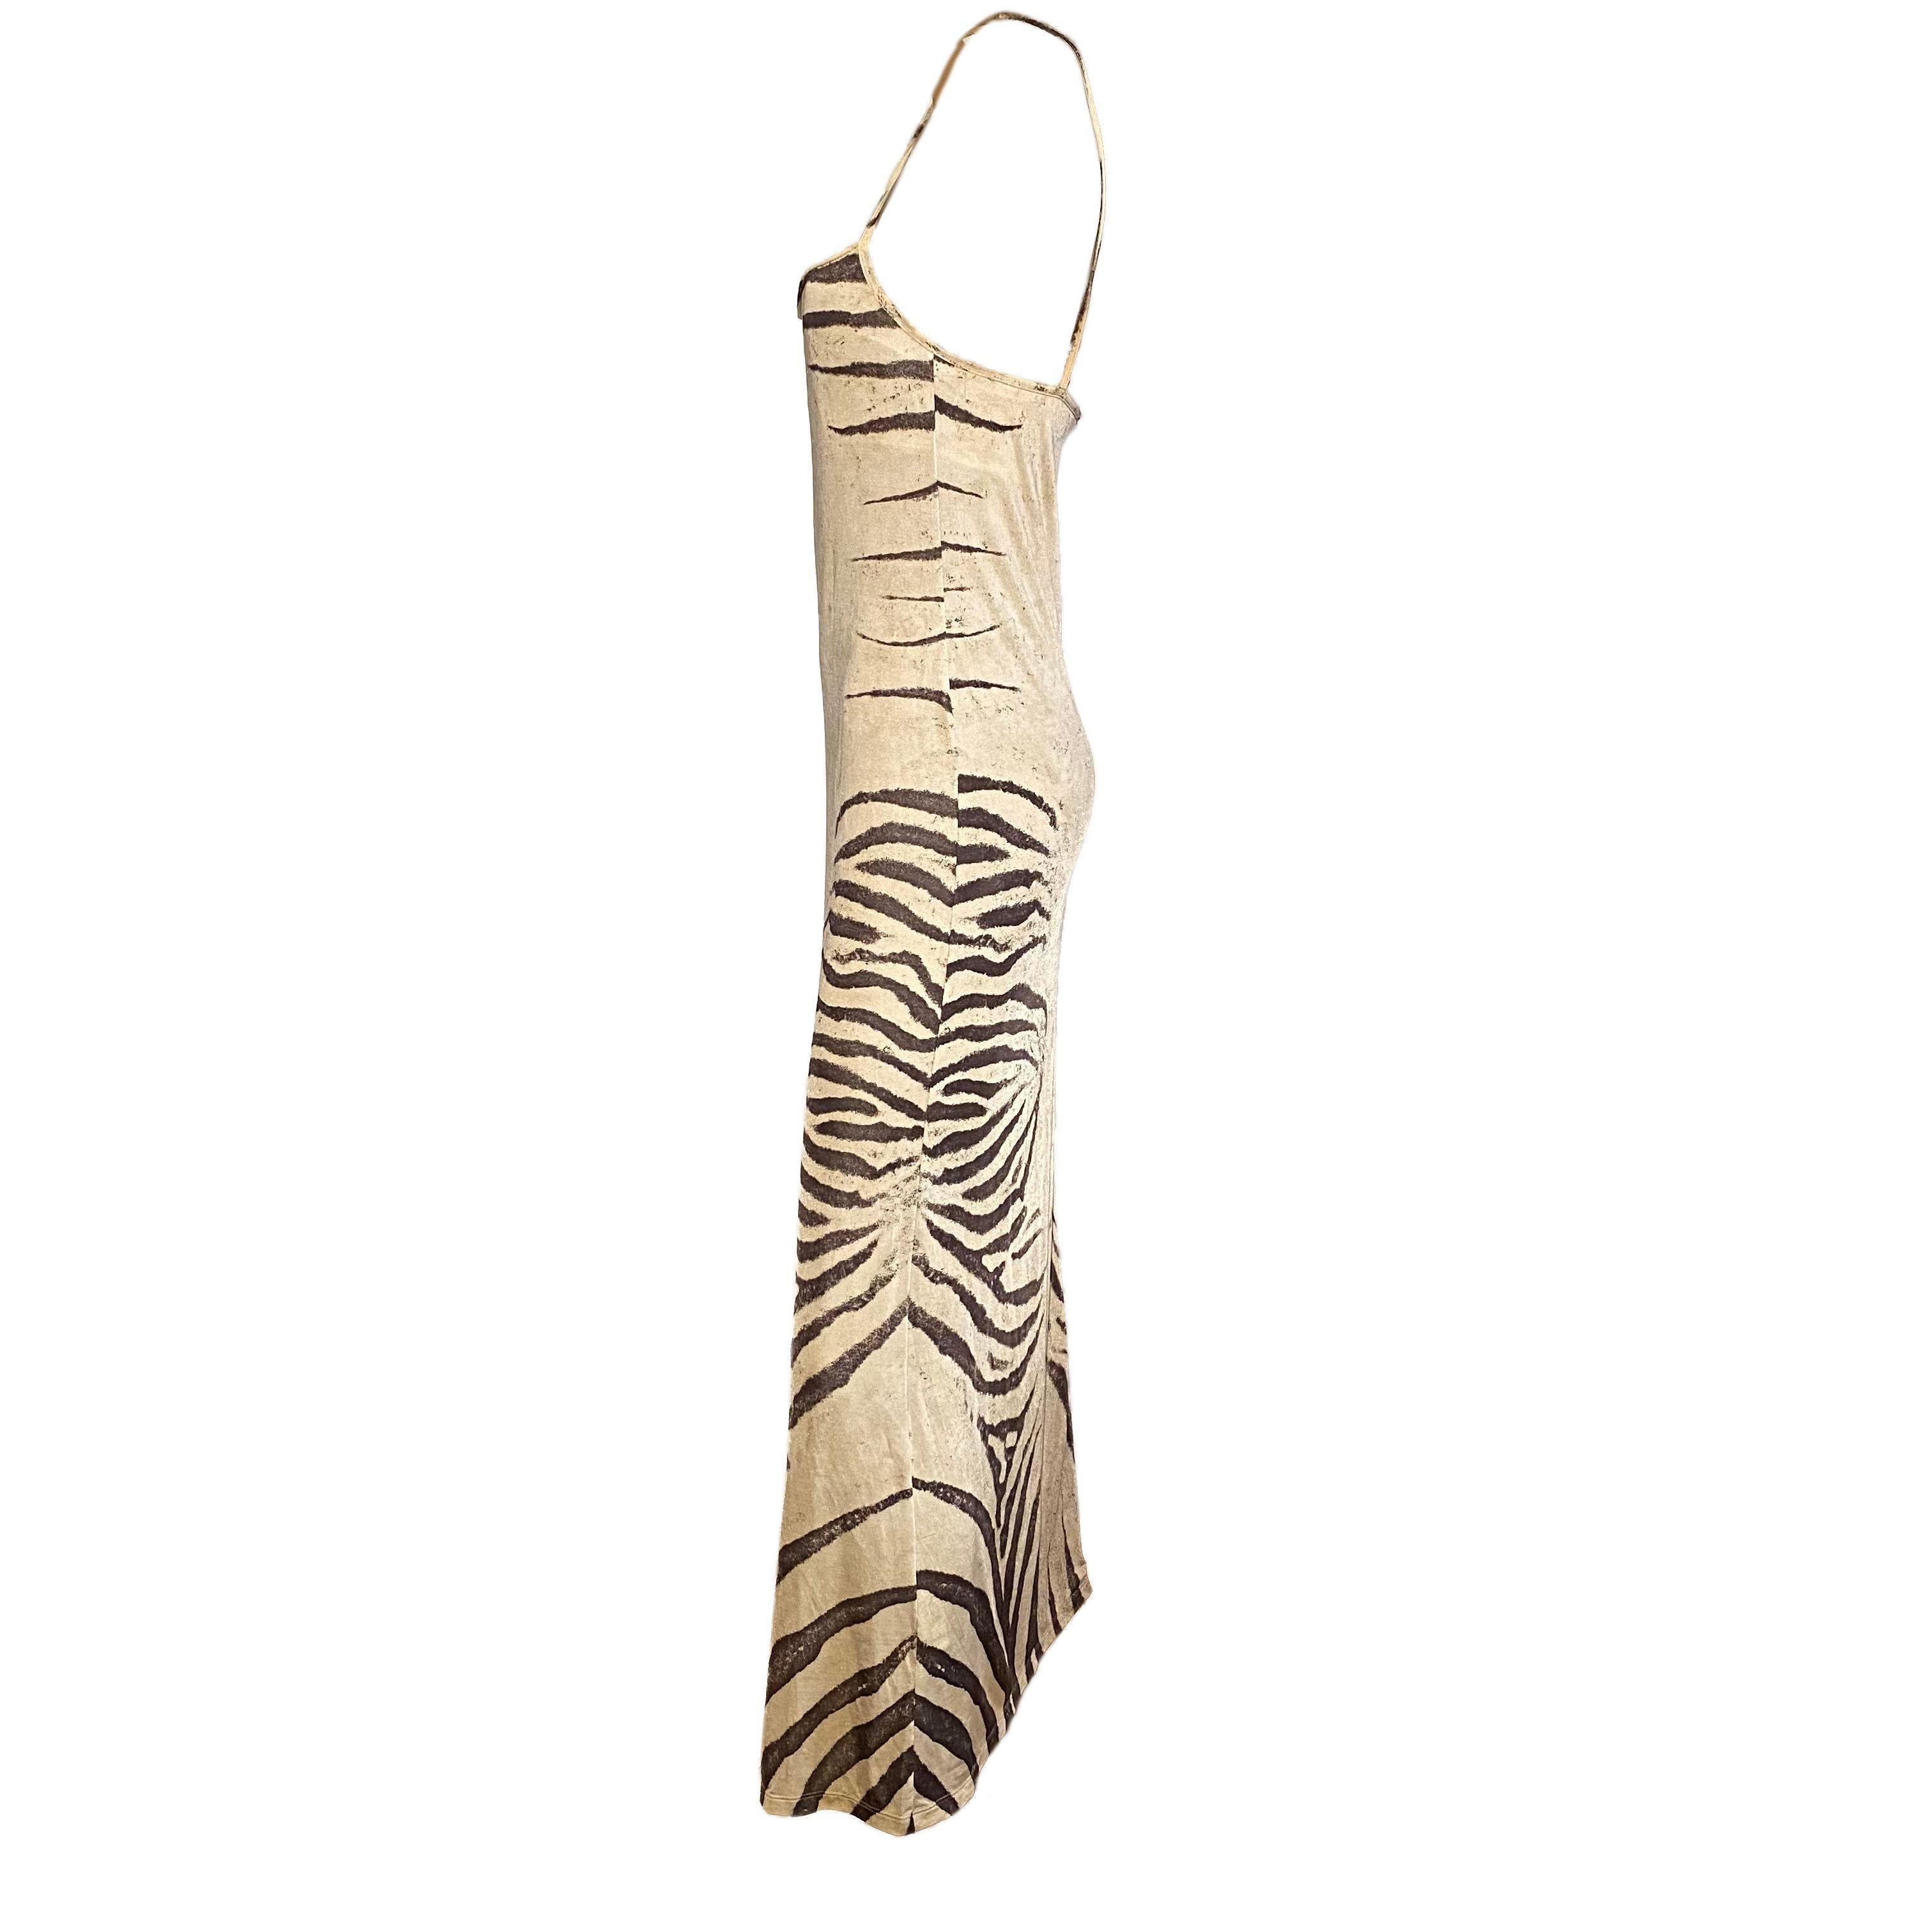 Roberto Cavalli long spaghetti strap dress with Ivory/Brown Zebra print from the Spring Summer 1999 collection.

Size S, can fit bigger sizes as the fabric is very stretchable

90% Polyamide
10% Elastane

Measurements:

Bust: 72 cm / 28,3